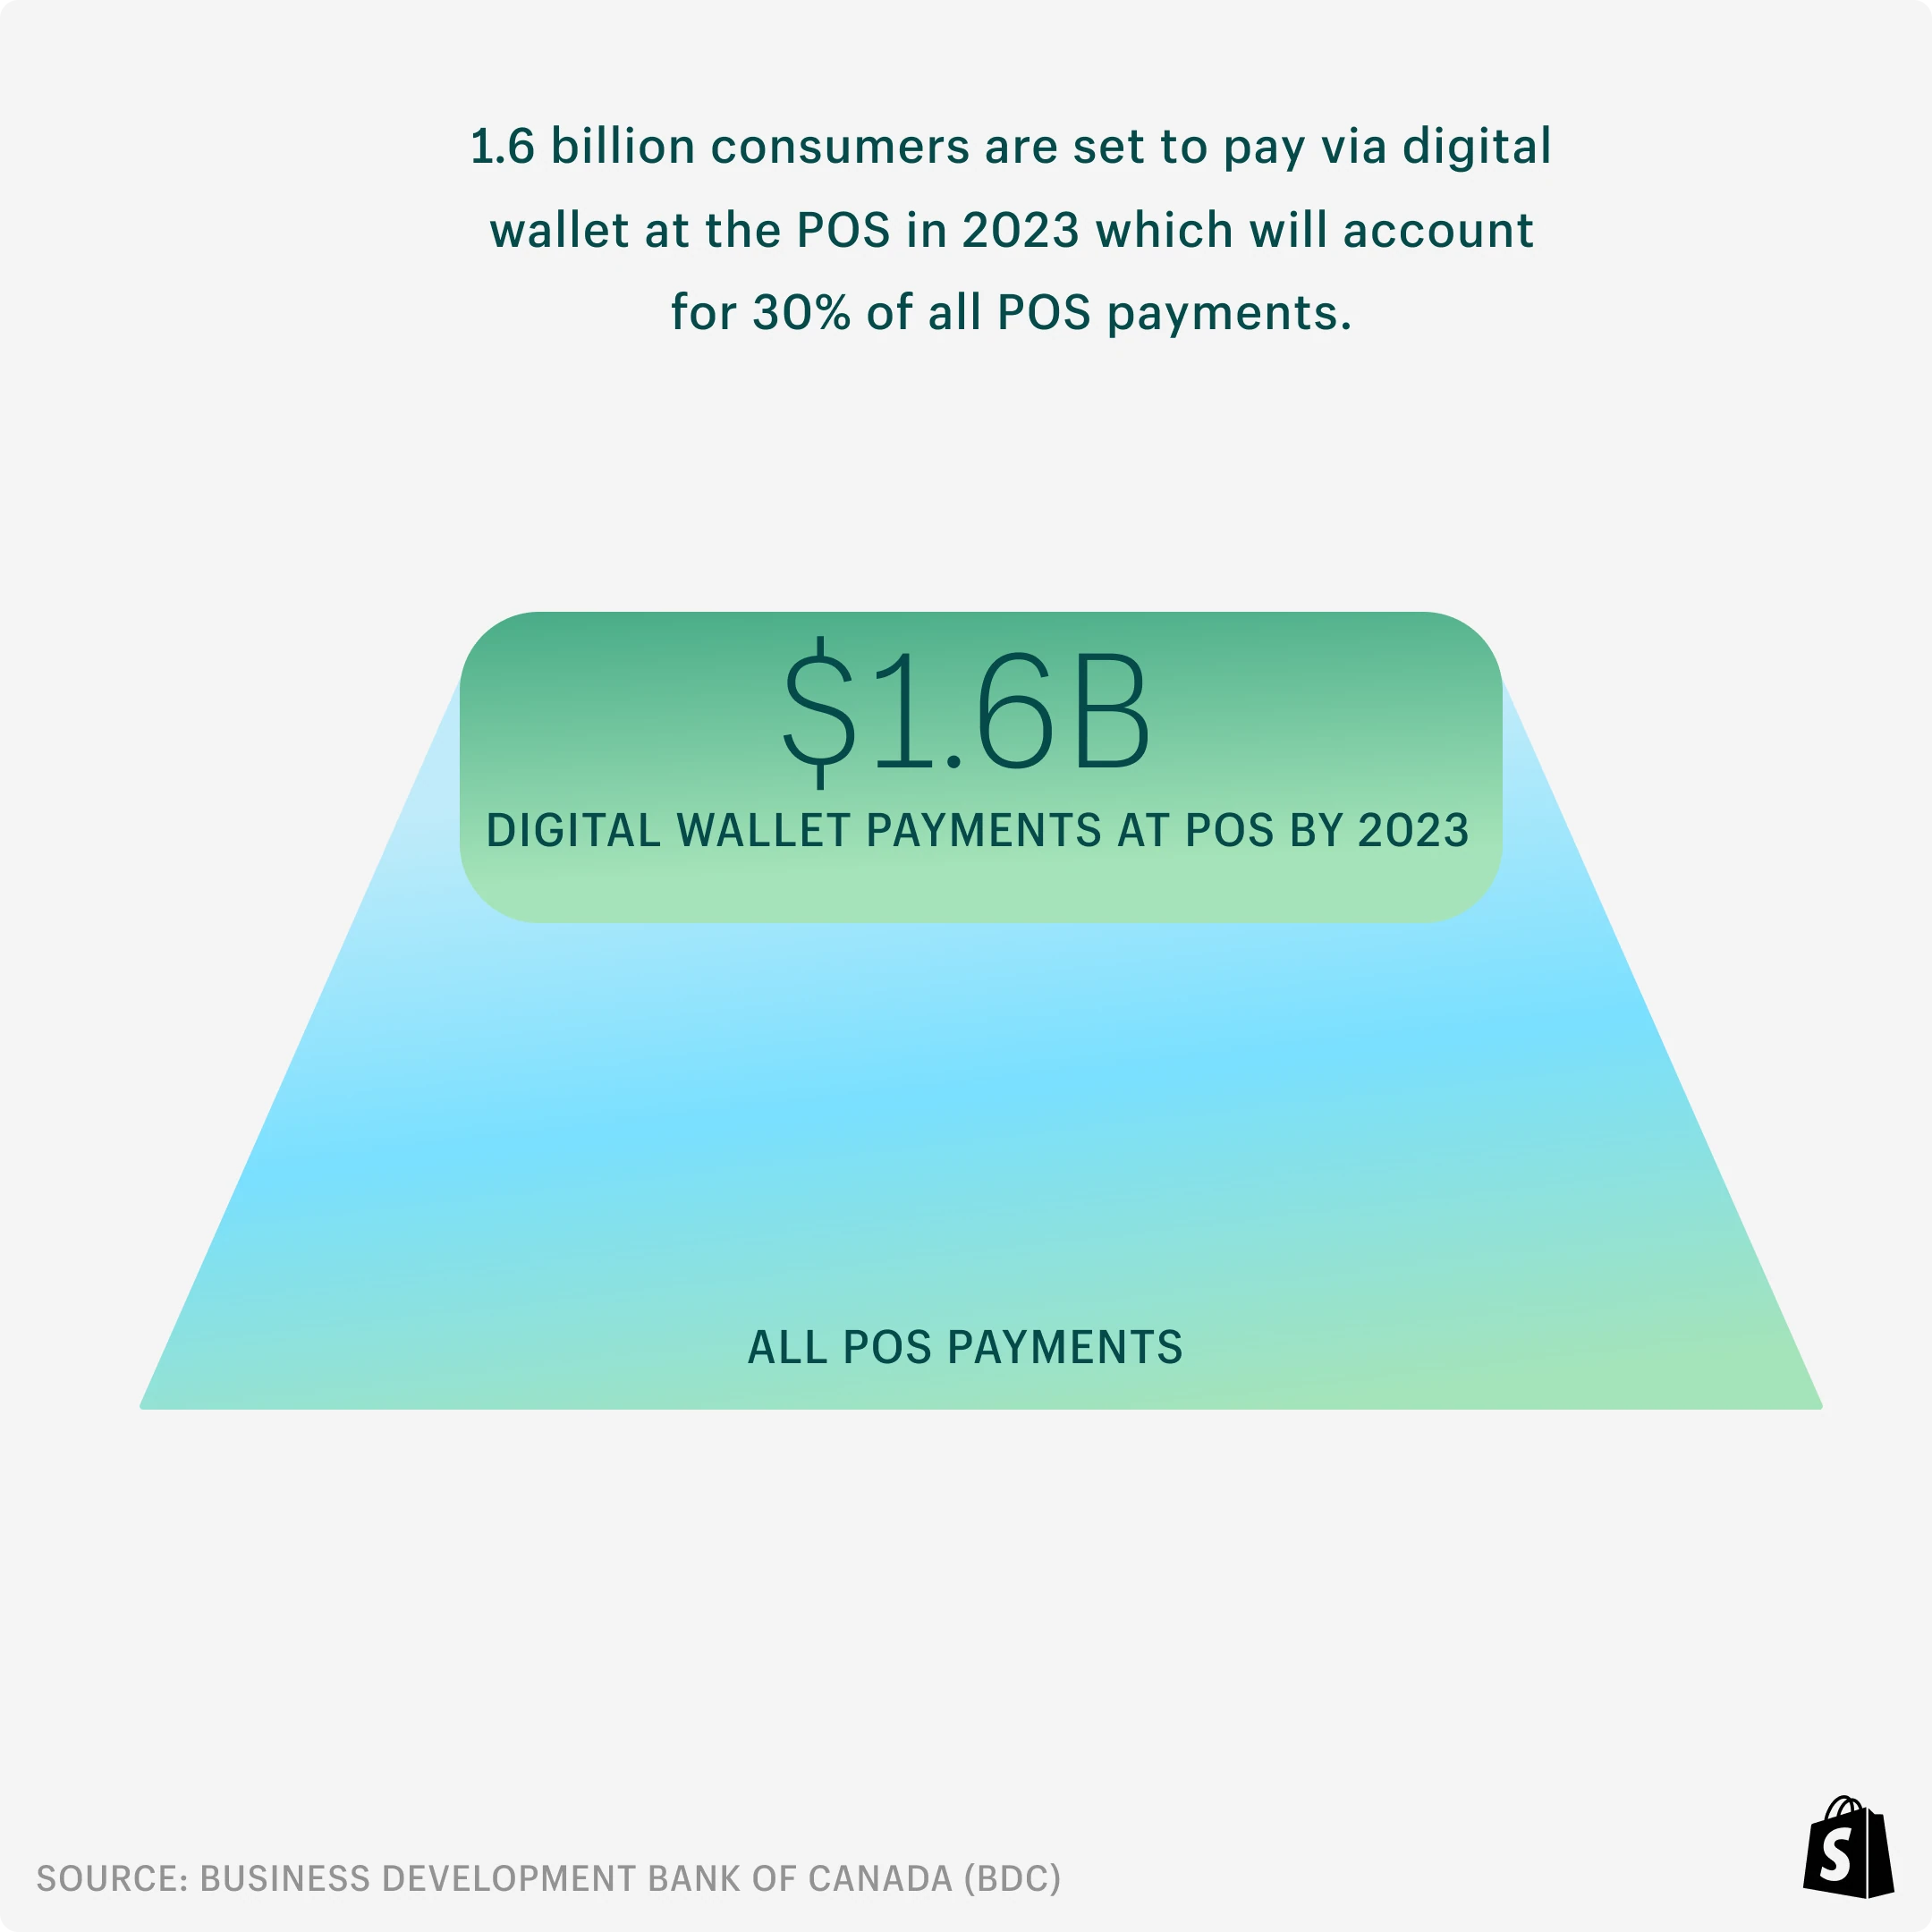 Graph showing that digital wallet customers will exceed 1.6 billion at point of sale in 2023, accounting for 30% of all POS payments